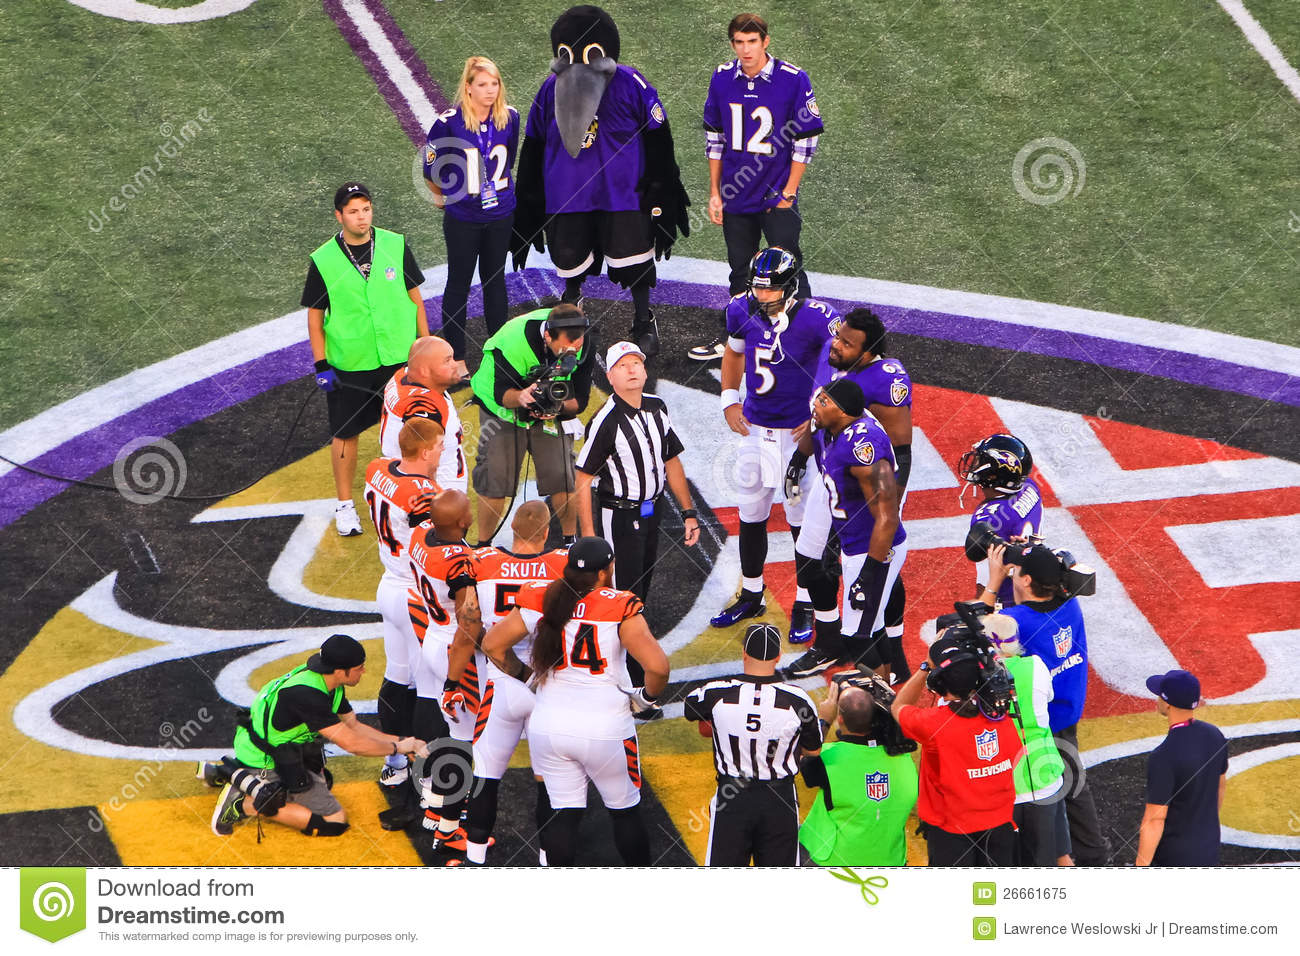 Nfl Monday Night Football Coin Toss Editorial Image   Image  26661675